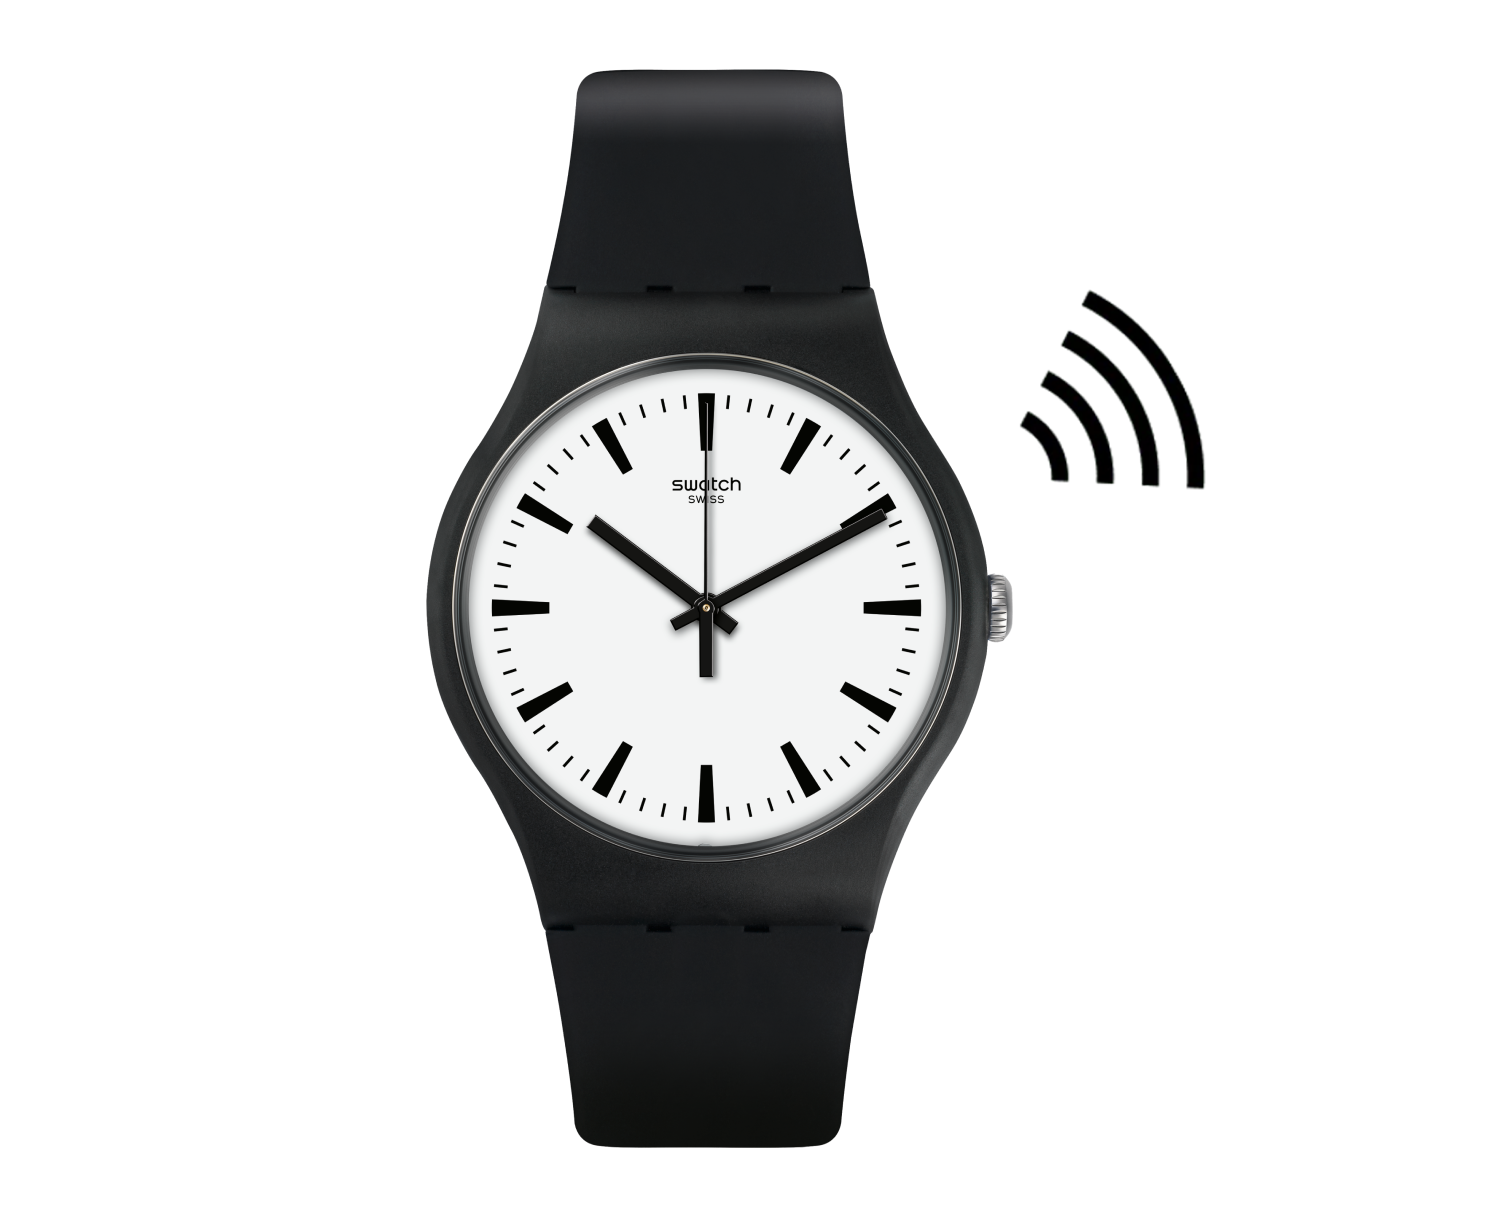 Blackpack pay watch